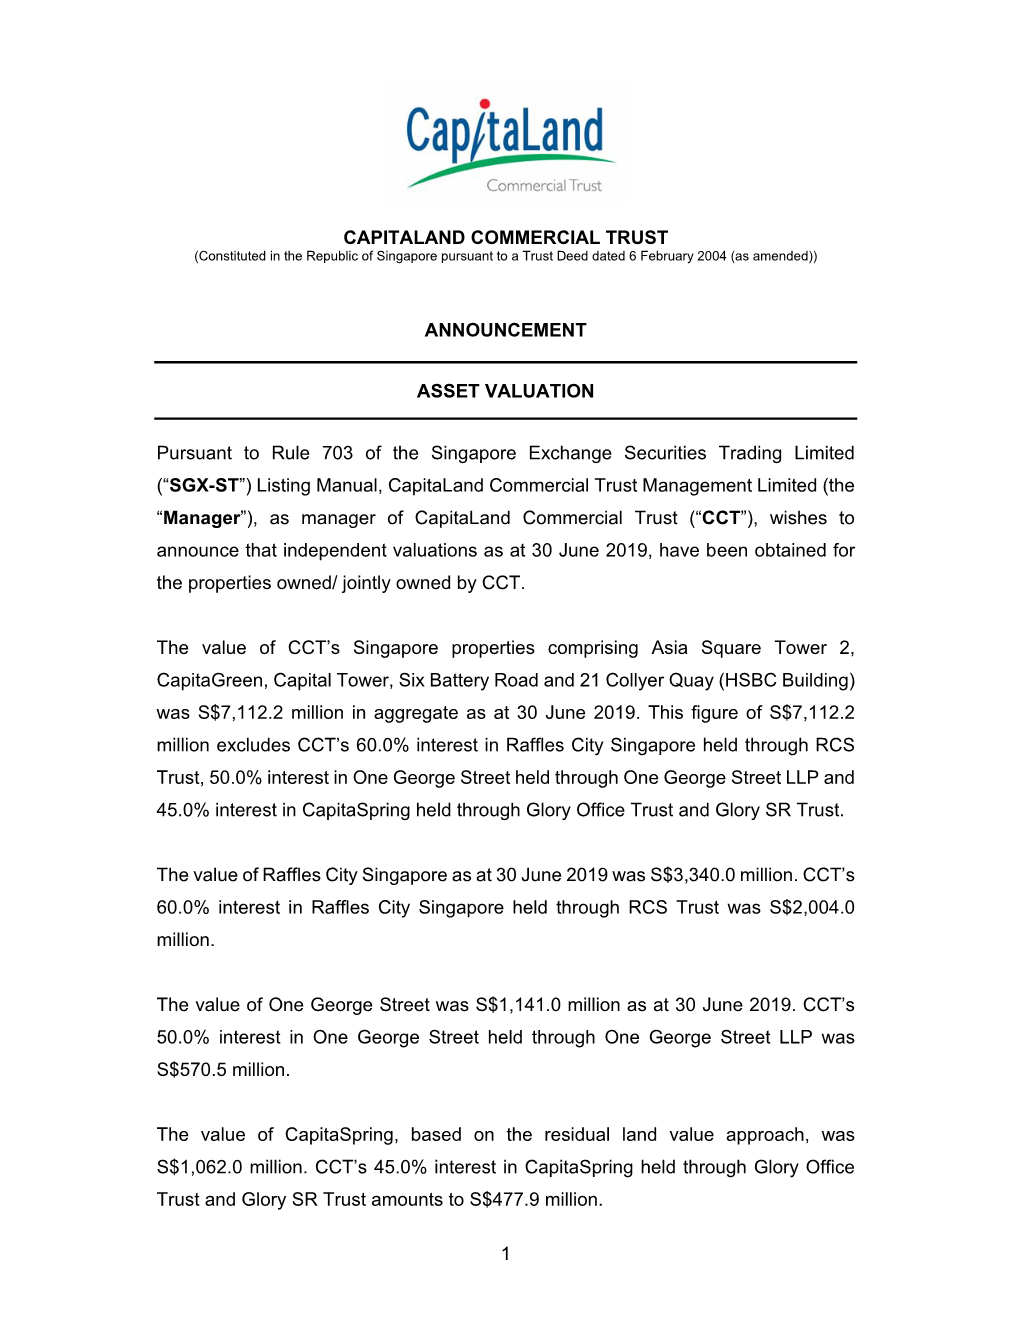 1 CAPITALAND COMMERCIAL TRUST ANNOUNCEMENT ASSET VALUATION Pursuant to Rule 703 of the Singapore Exchange Securities Trading